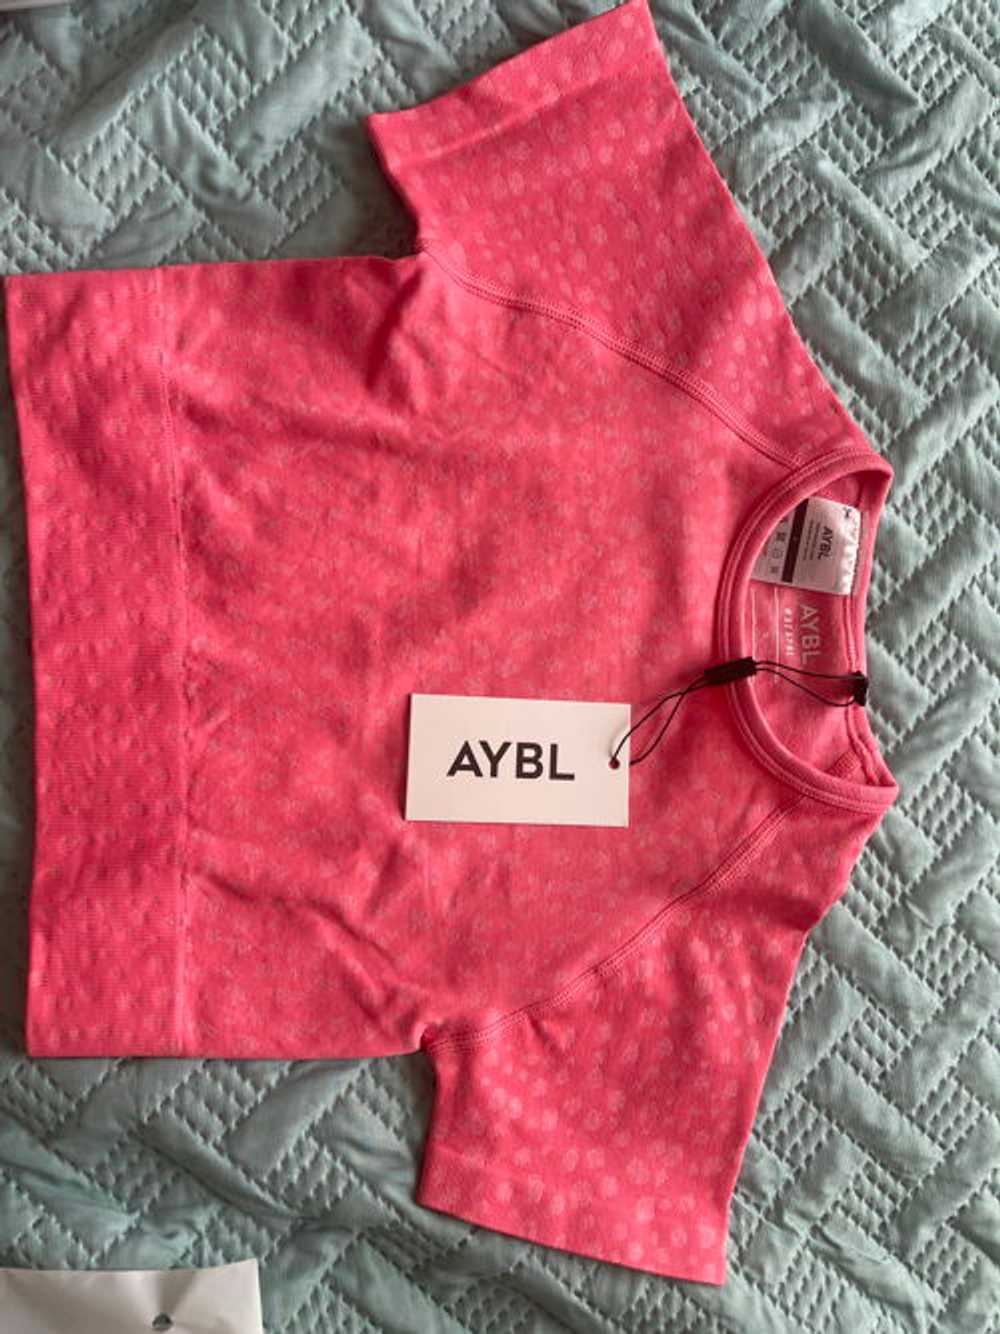 AYBL Evolve Speckle Seamless Crop Top - Coral Pink - image 3